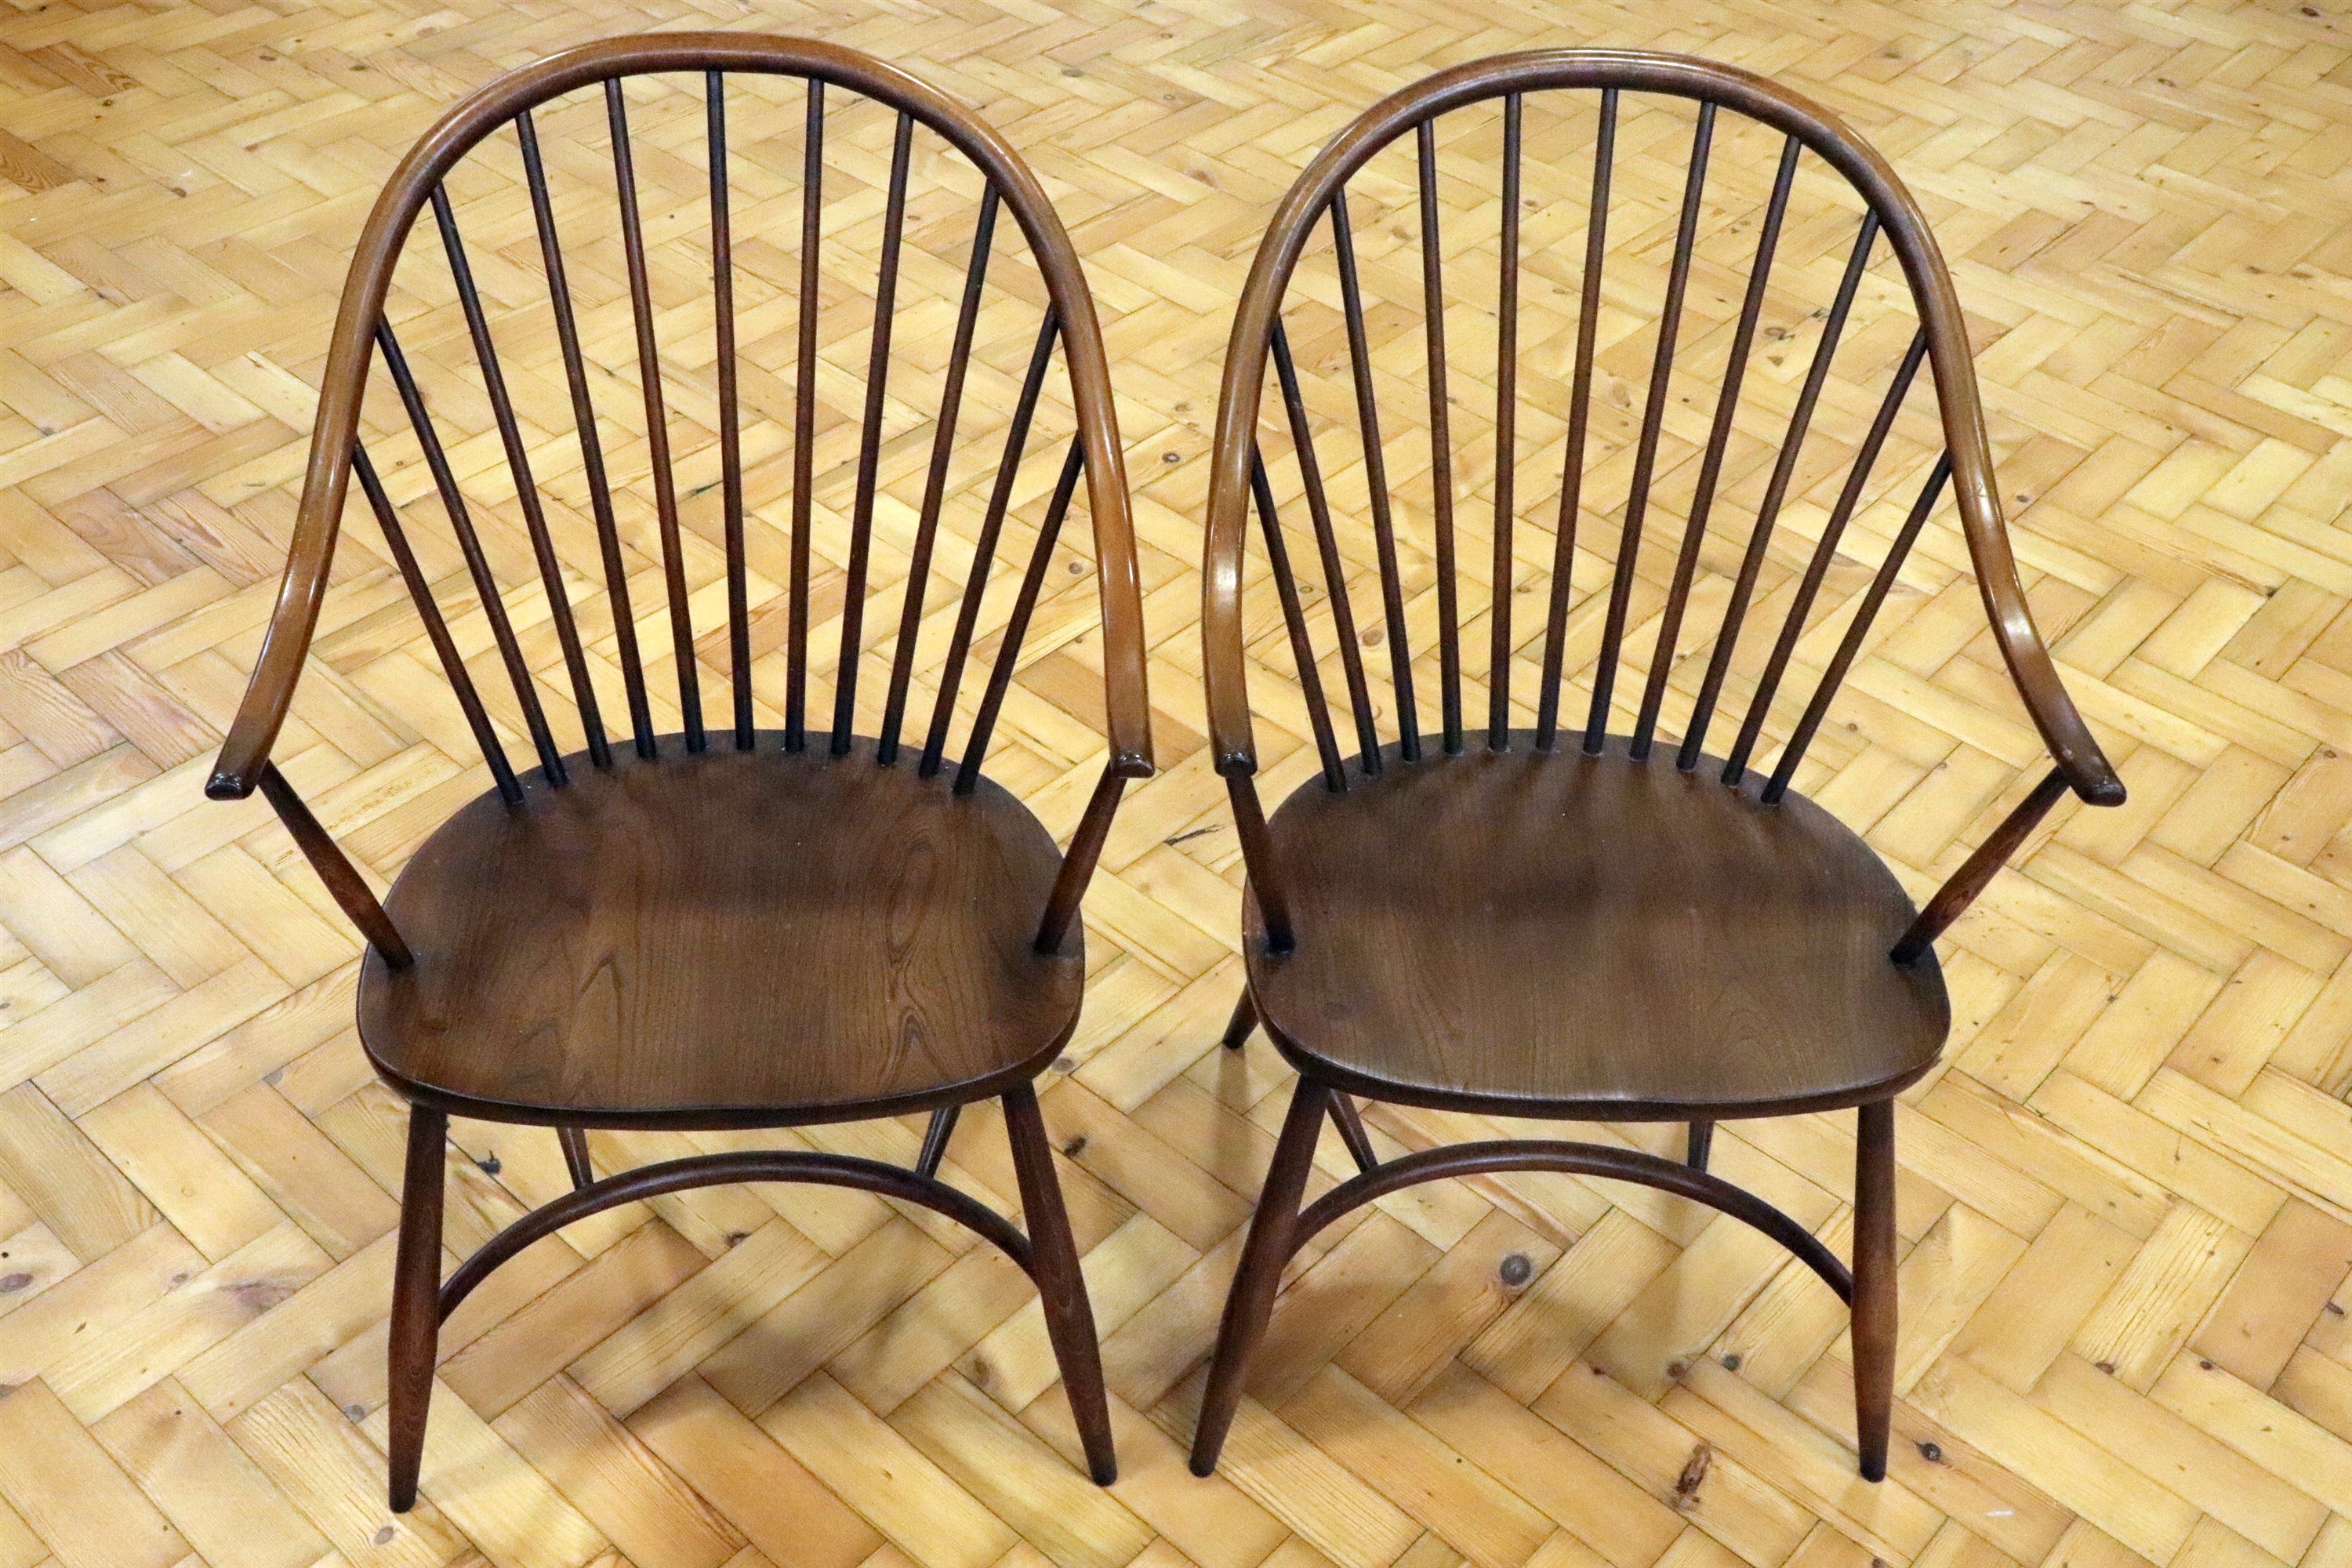 A pair of Ercol armchairs, Latimer or similar pattern with crinoline stretchers